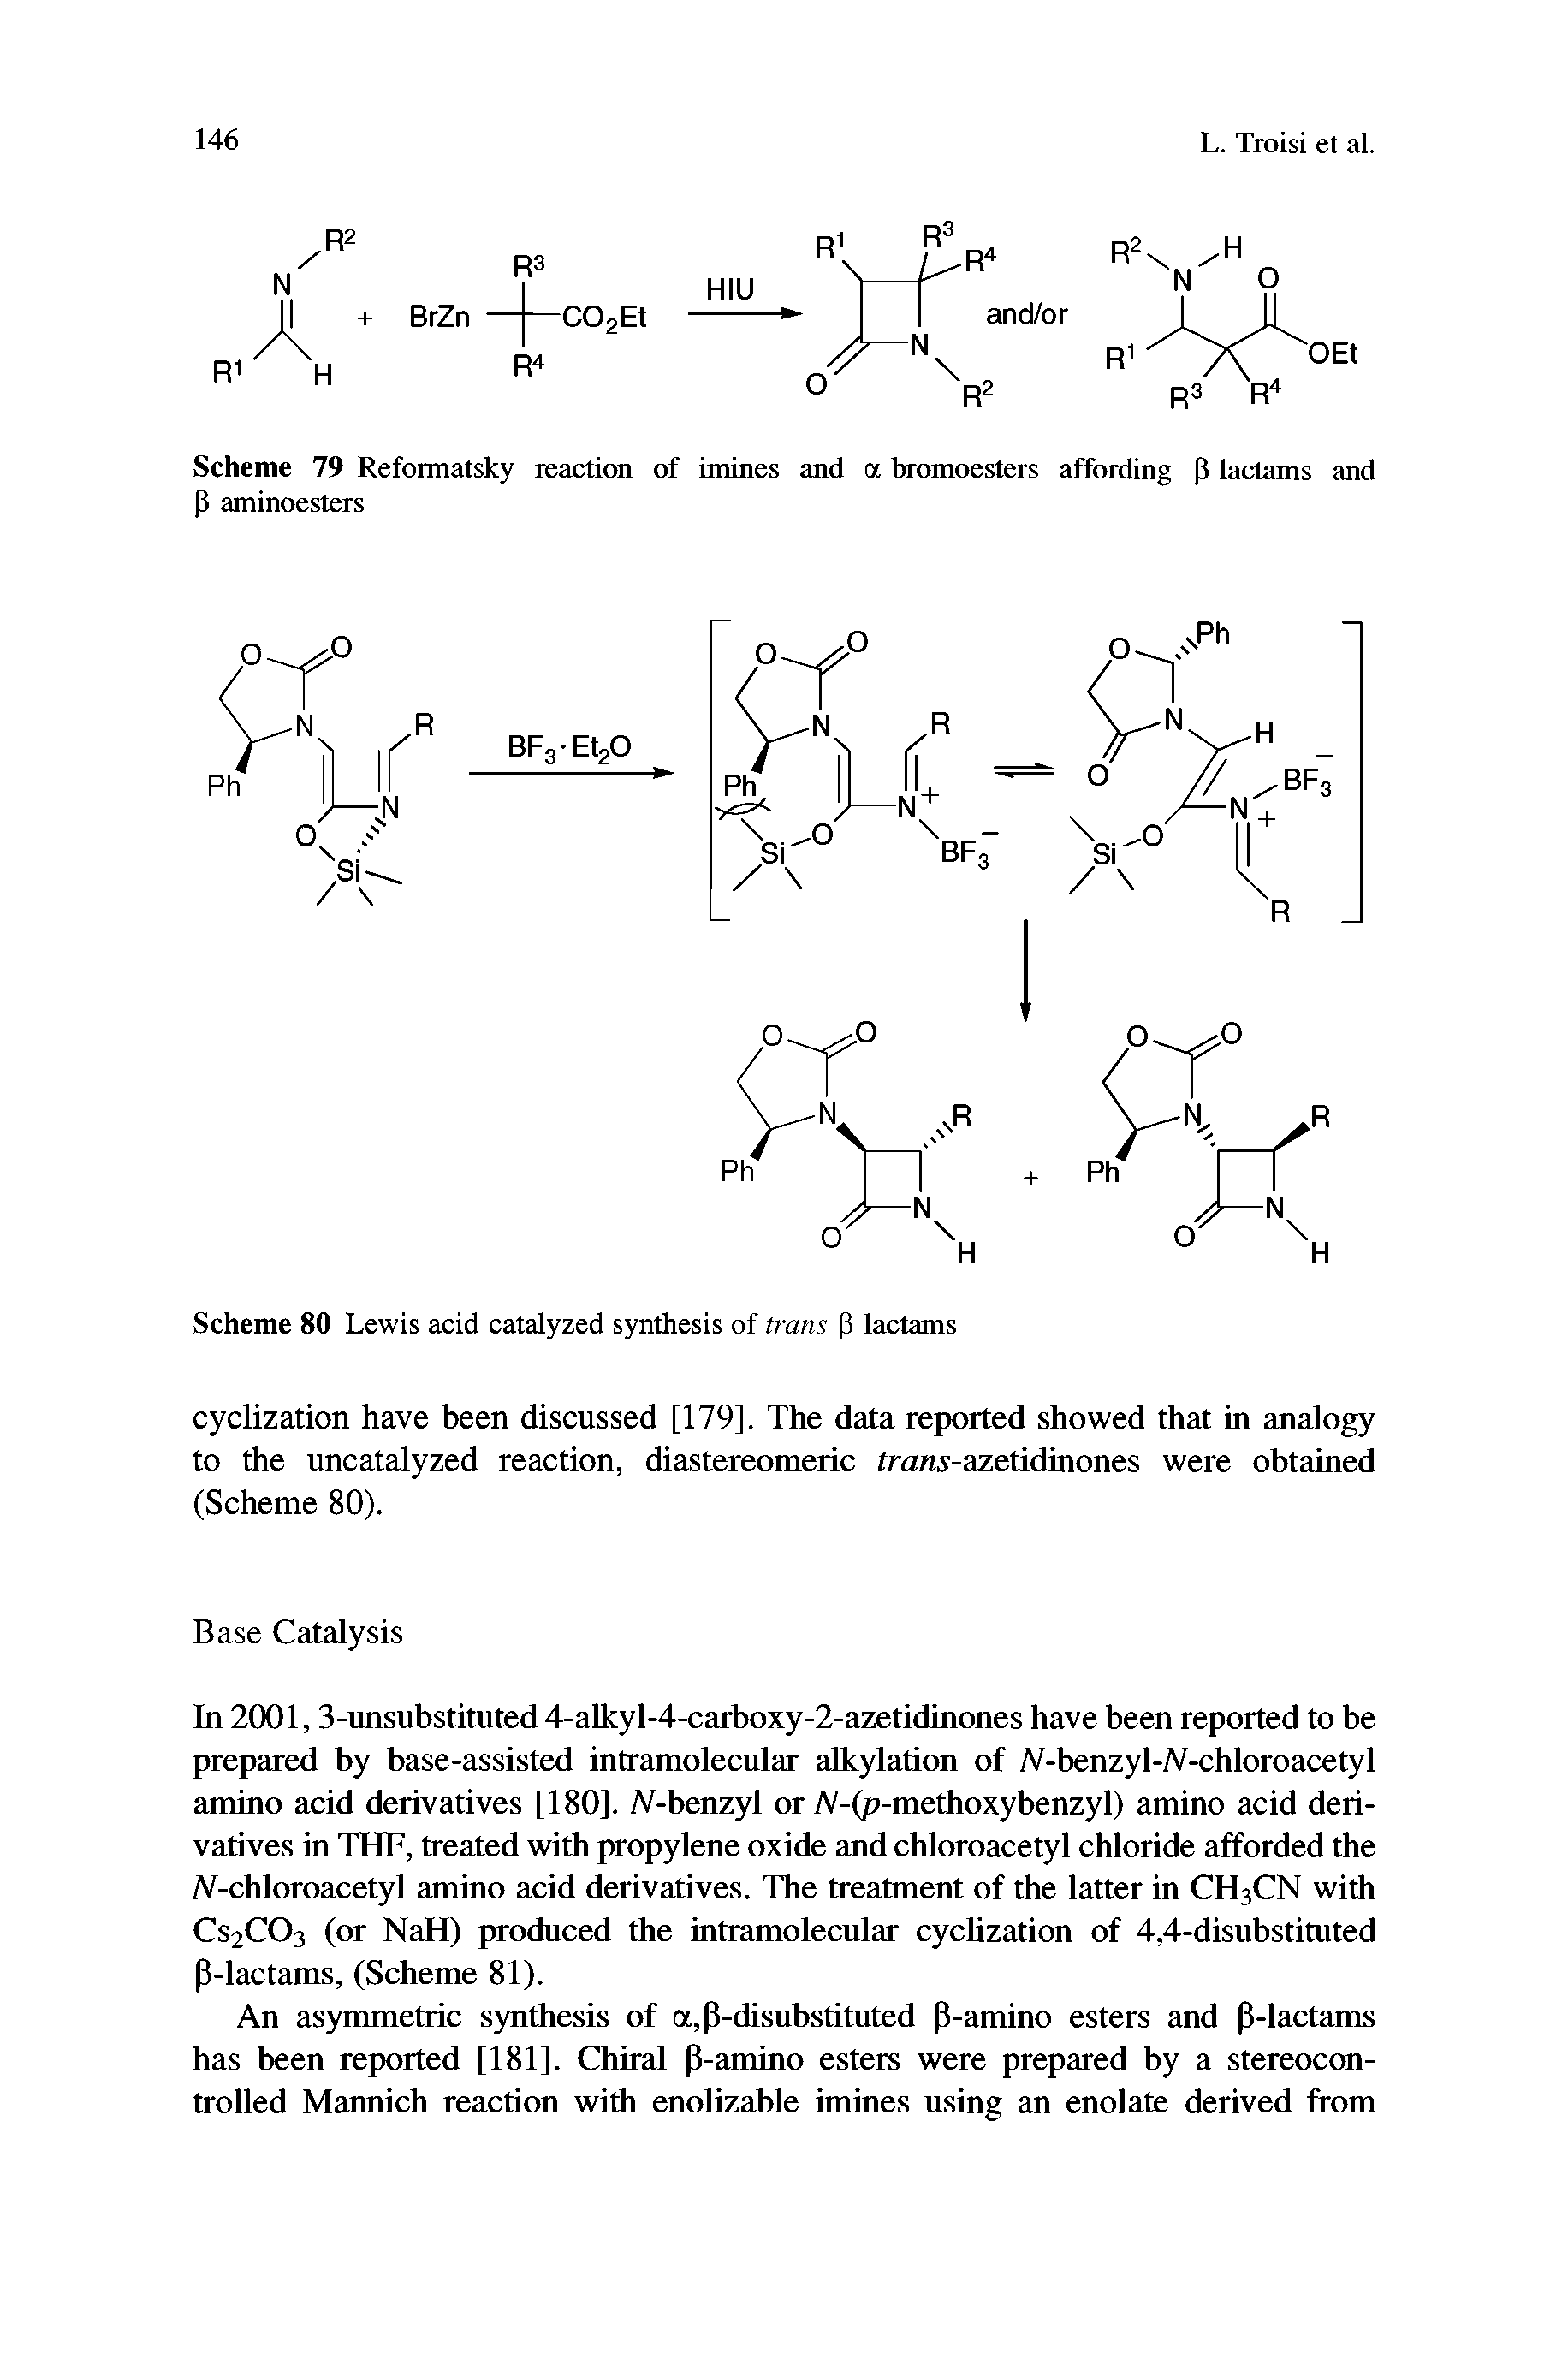 Scheme 79 Reformatsky reaction of imines and a bromoesters affording P lactams and P aminoesters...